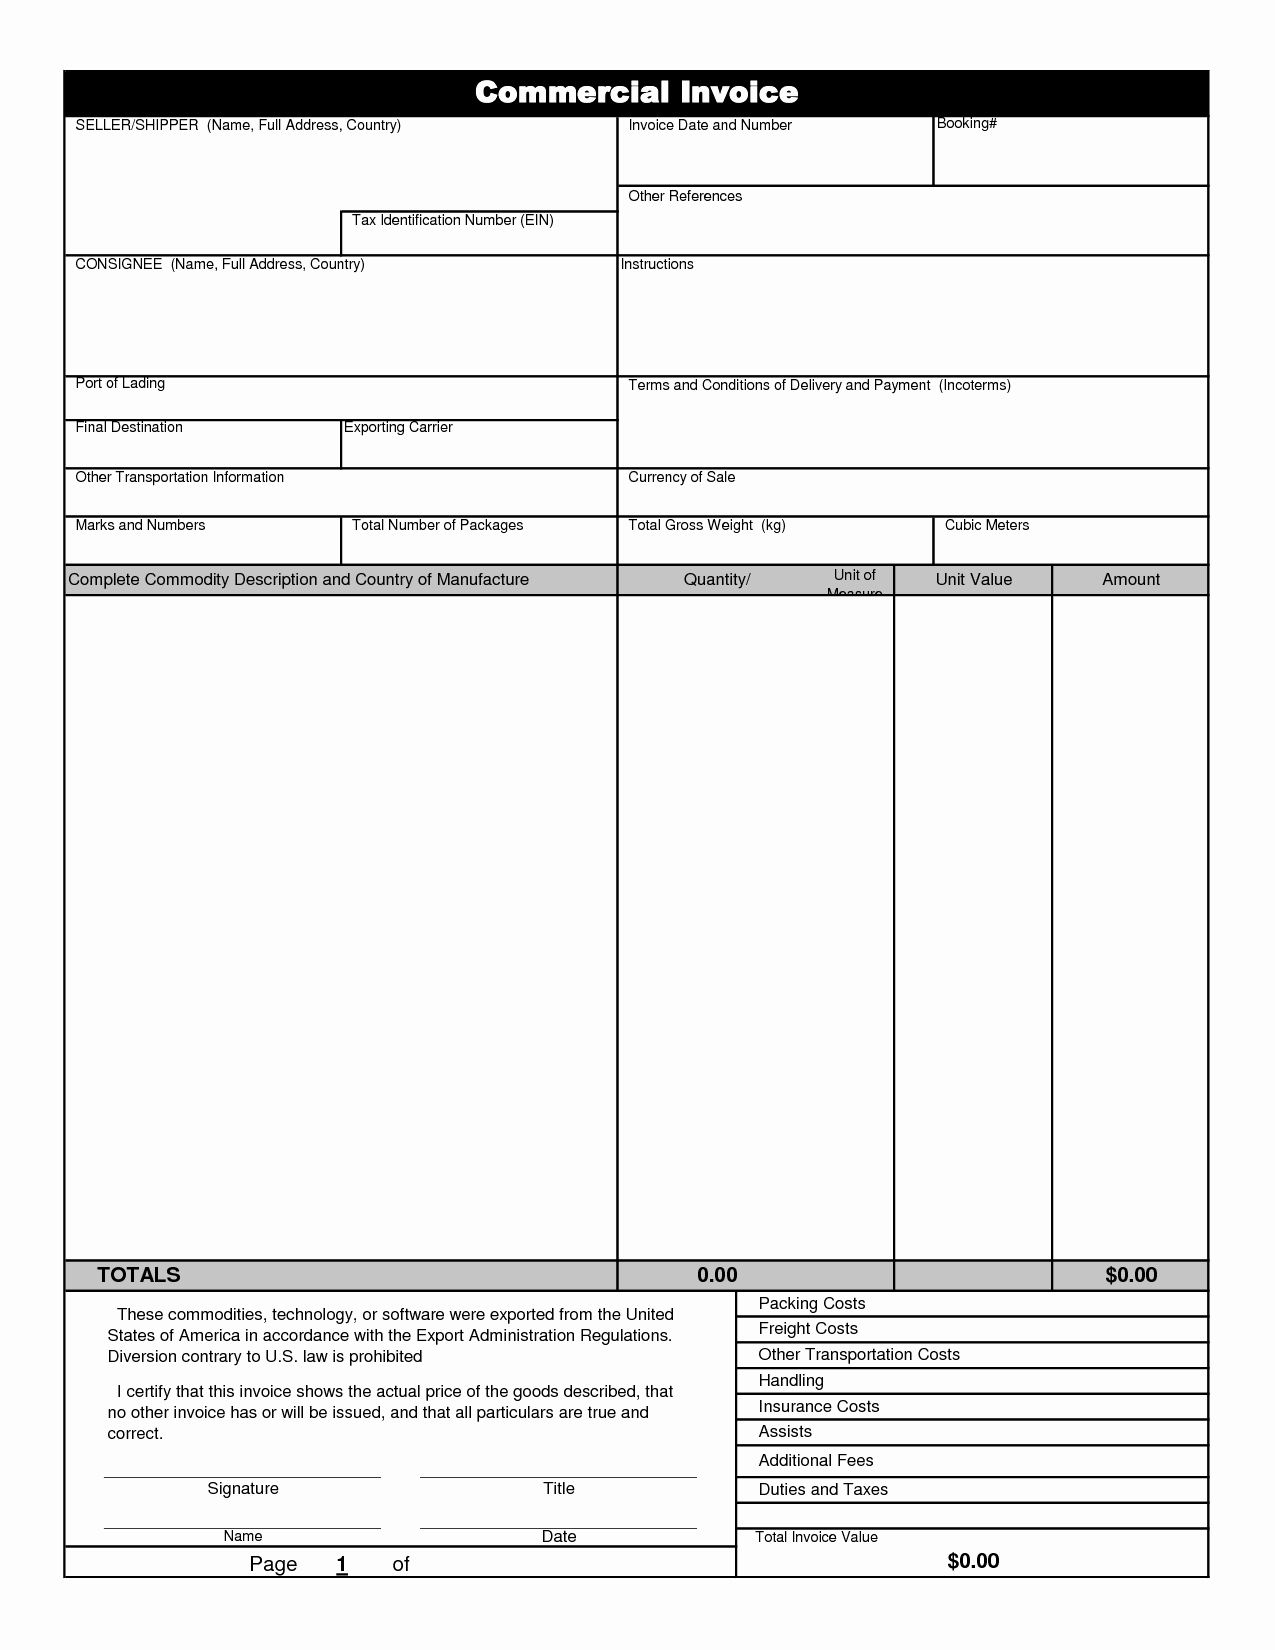 International Commercial Invoice Template Word Fresh International Mercial Invoice Template